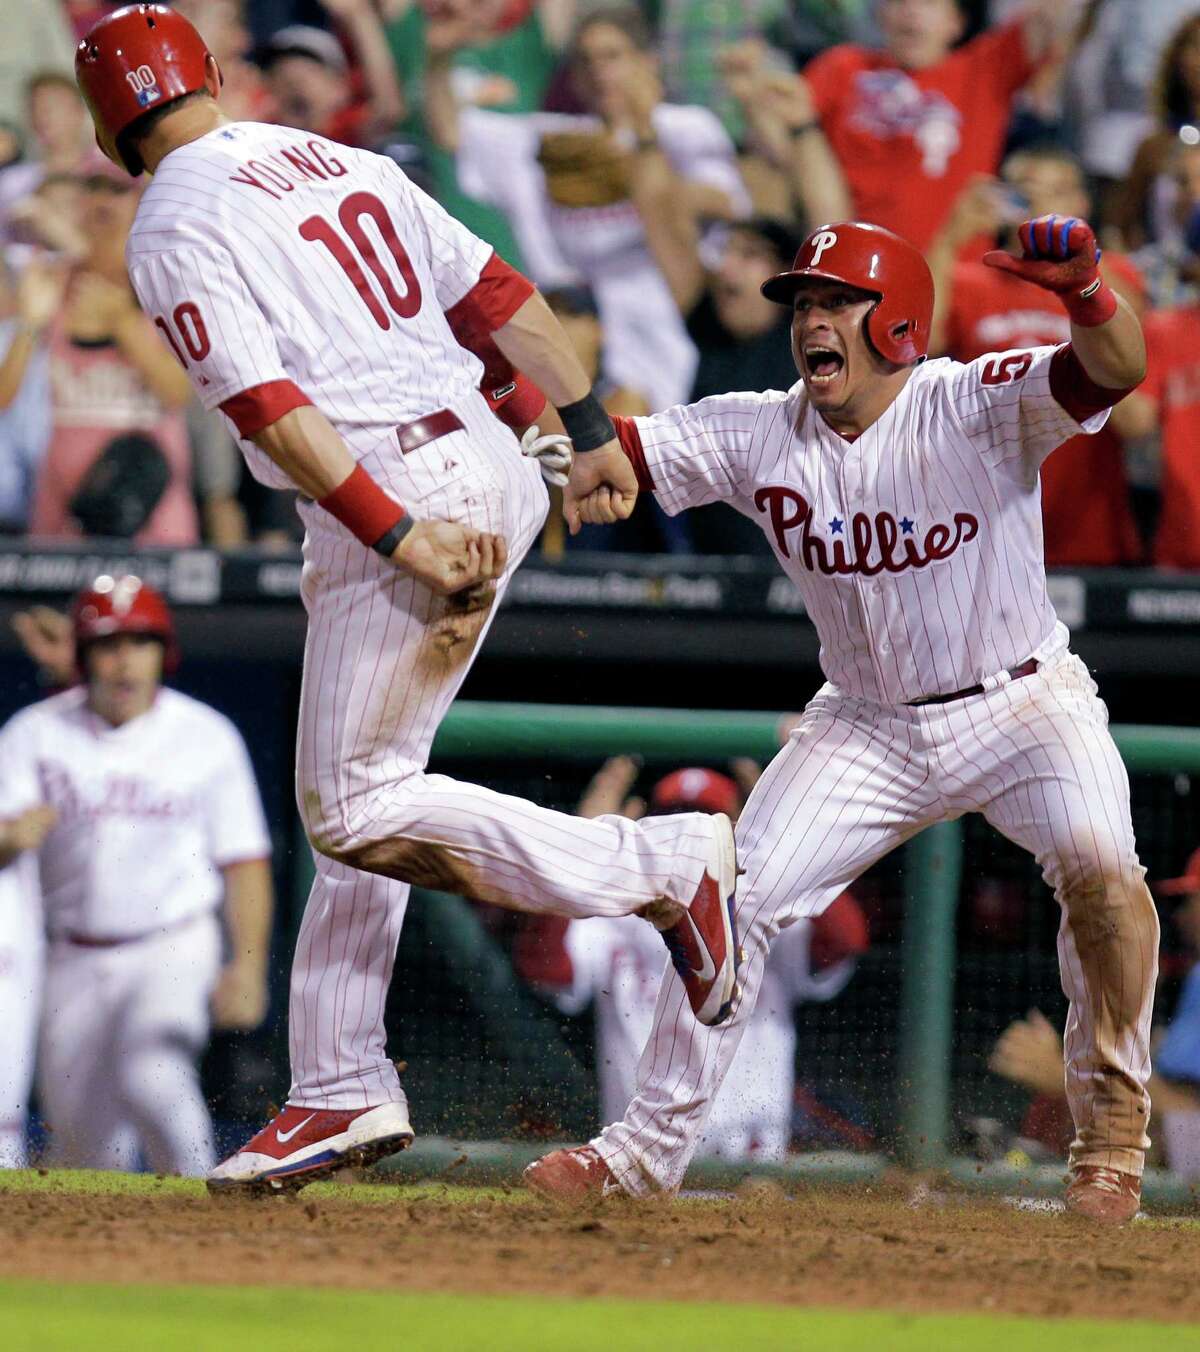 Despite their team being all but out of the playoff picture, Michael Young, left, and Carlos Ruiz had plenty to celebrate after the Phillies' walkoff win.